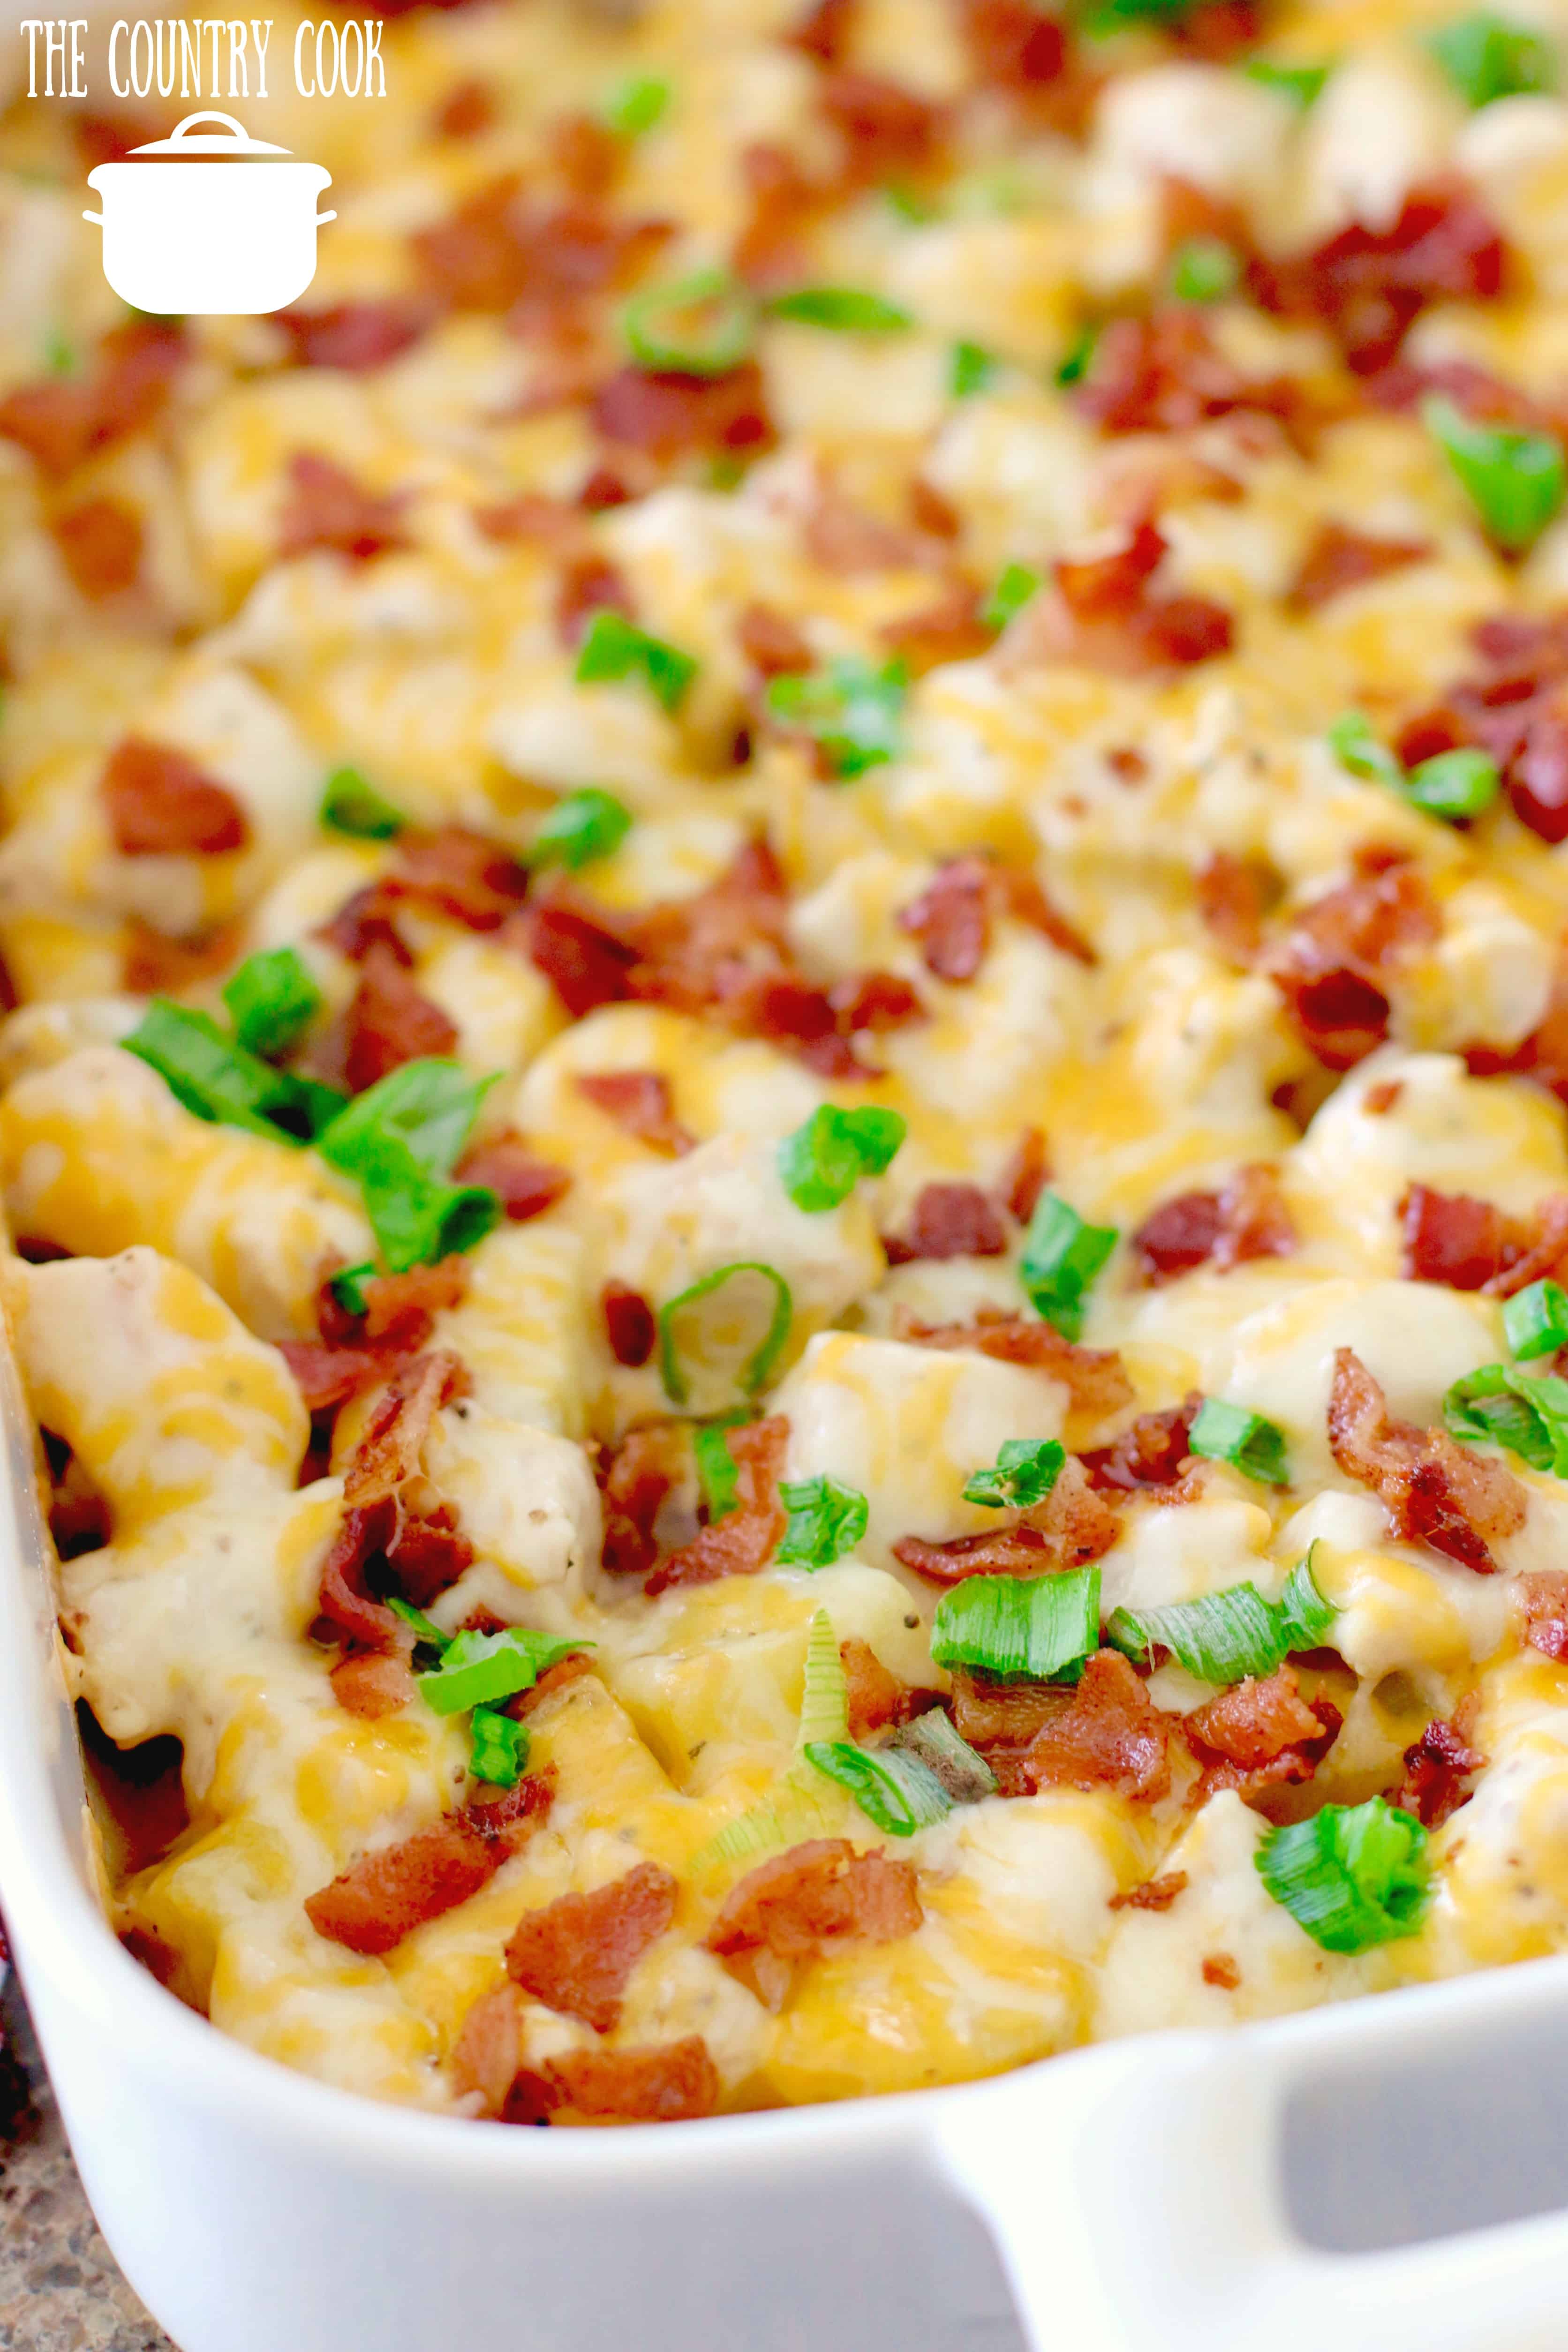 Cheddar Bacon Ranch Potato Casserole shown fully baked in a white casserole baking dish. 